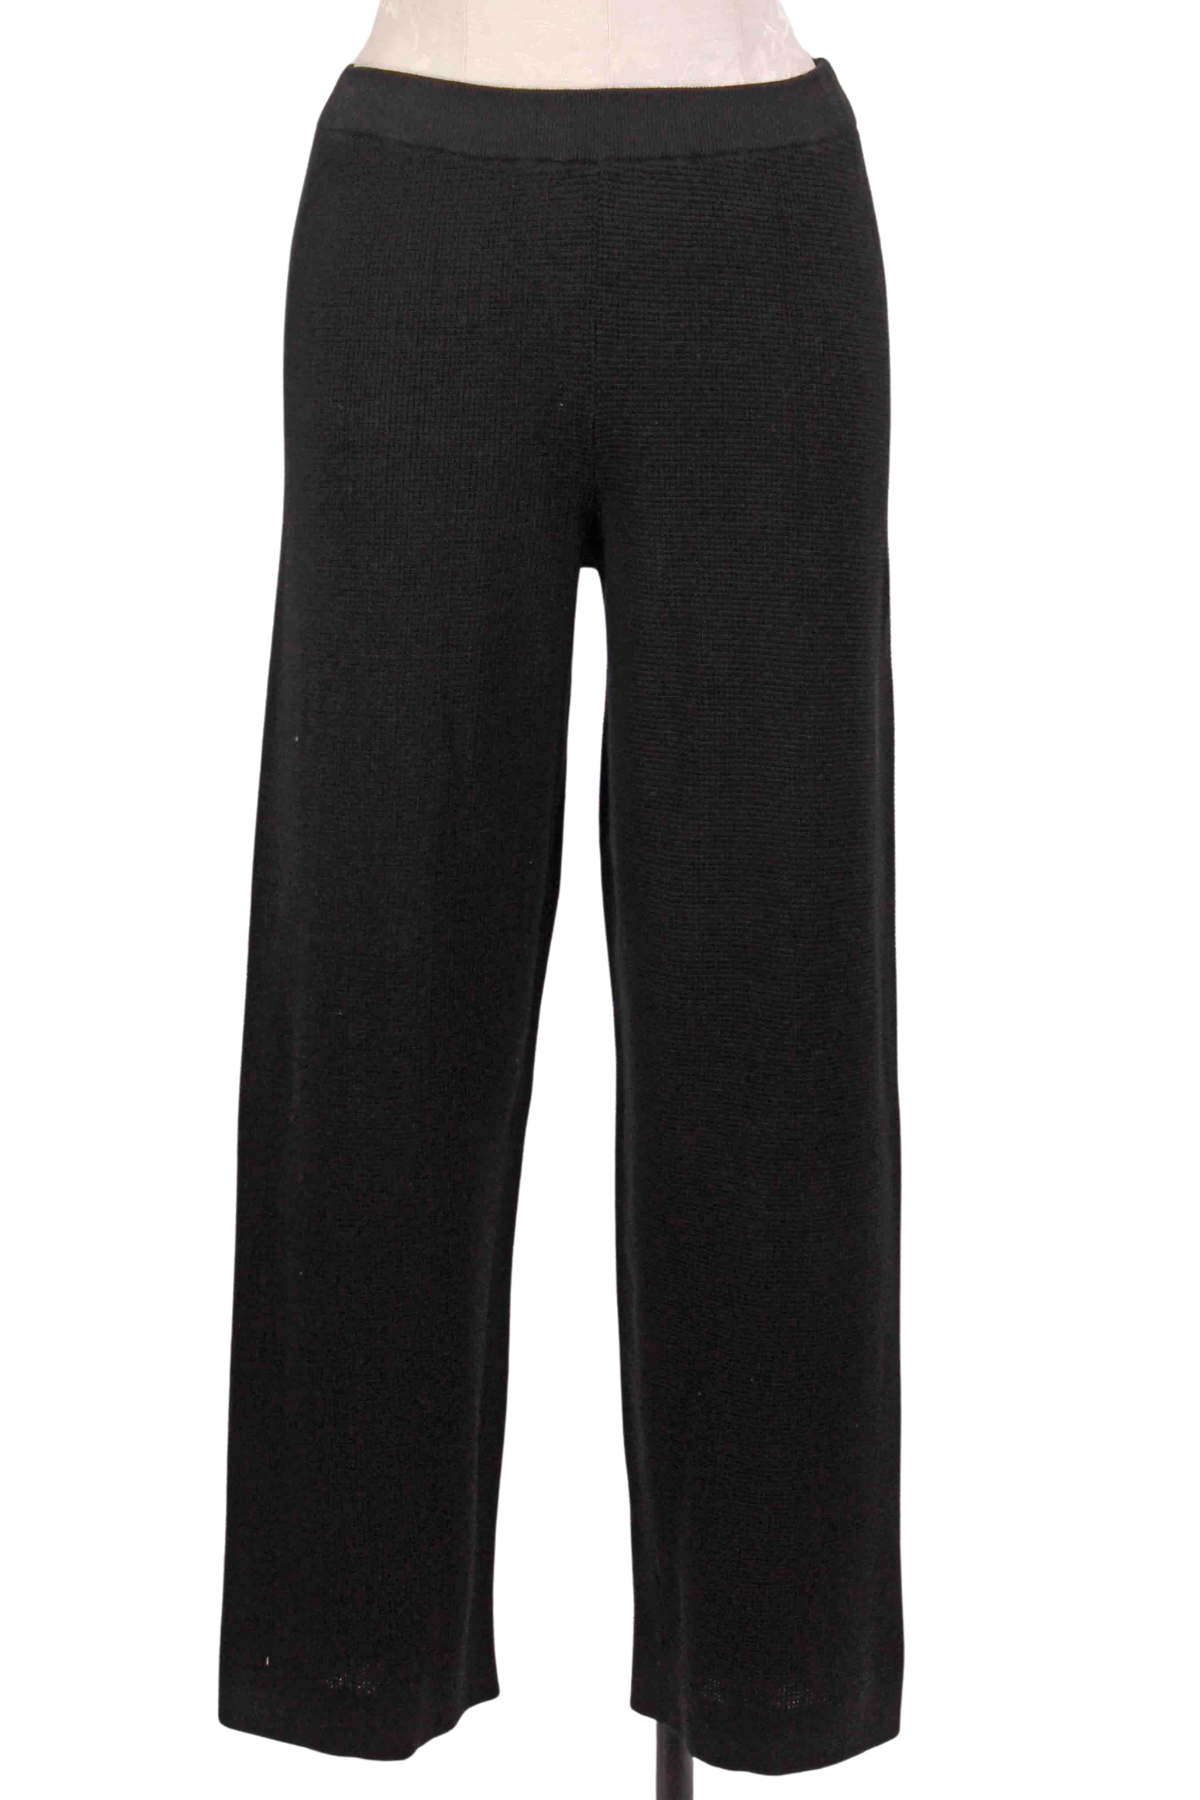 black Micro Thermal Knit Ankle Pant by Liv by Habitat